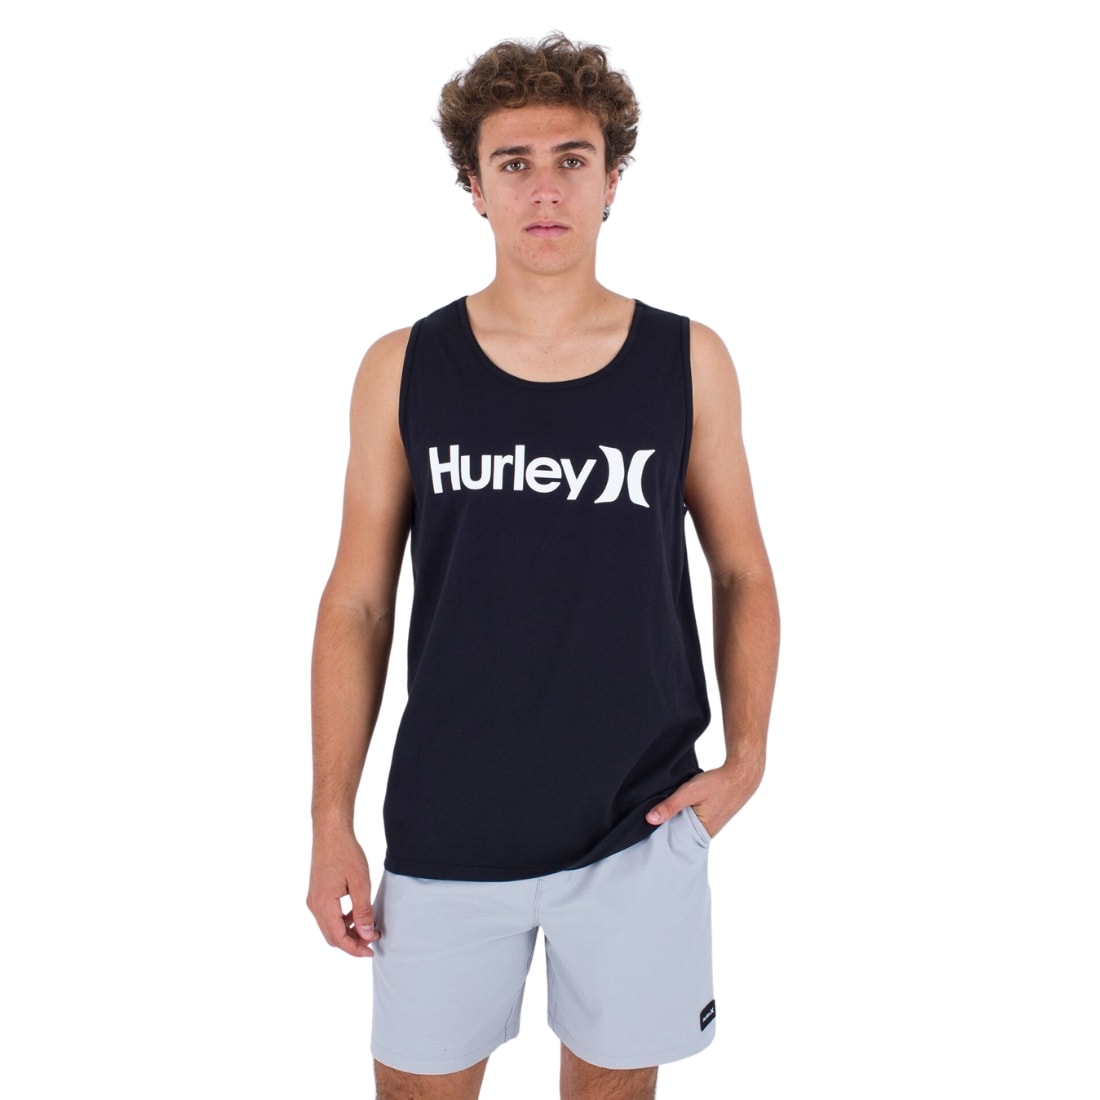 Hurley Everyday One & Only Solid Tank Top Vest - Black - Mens Surf Brand Vest/Tank Top by Hurley